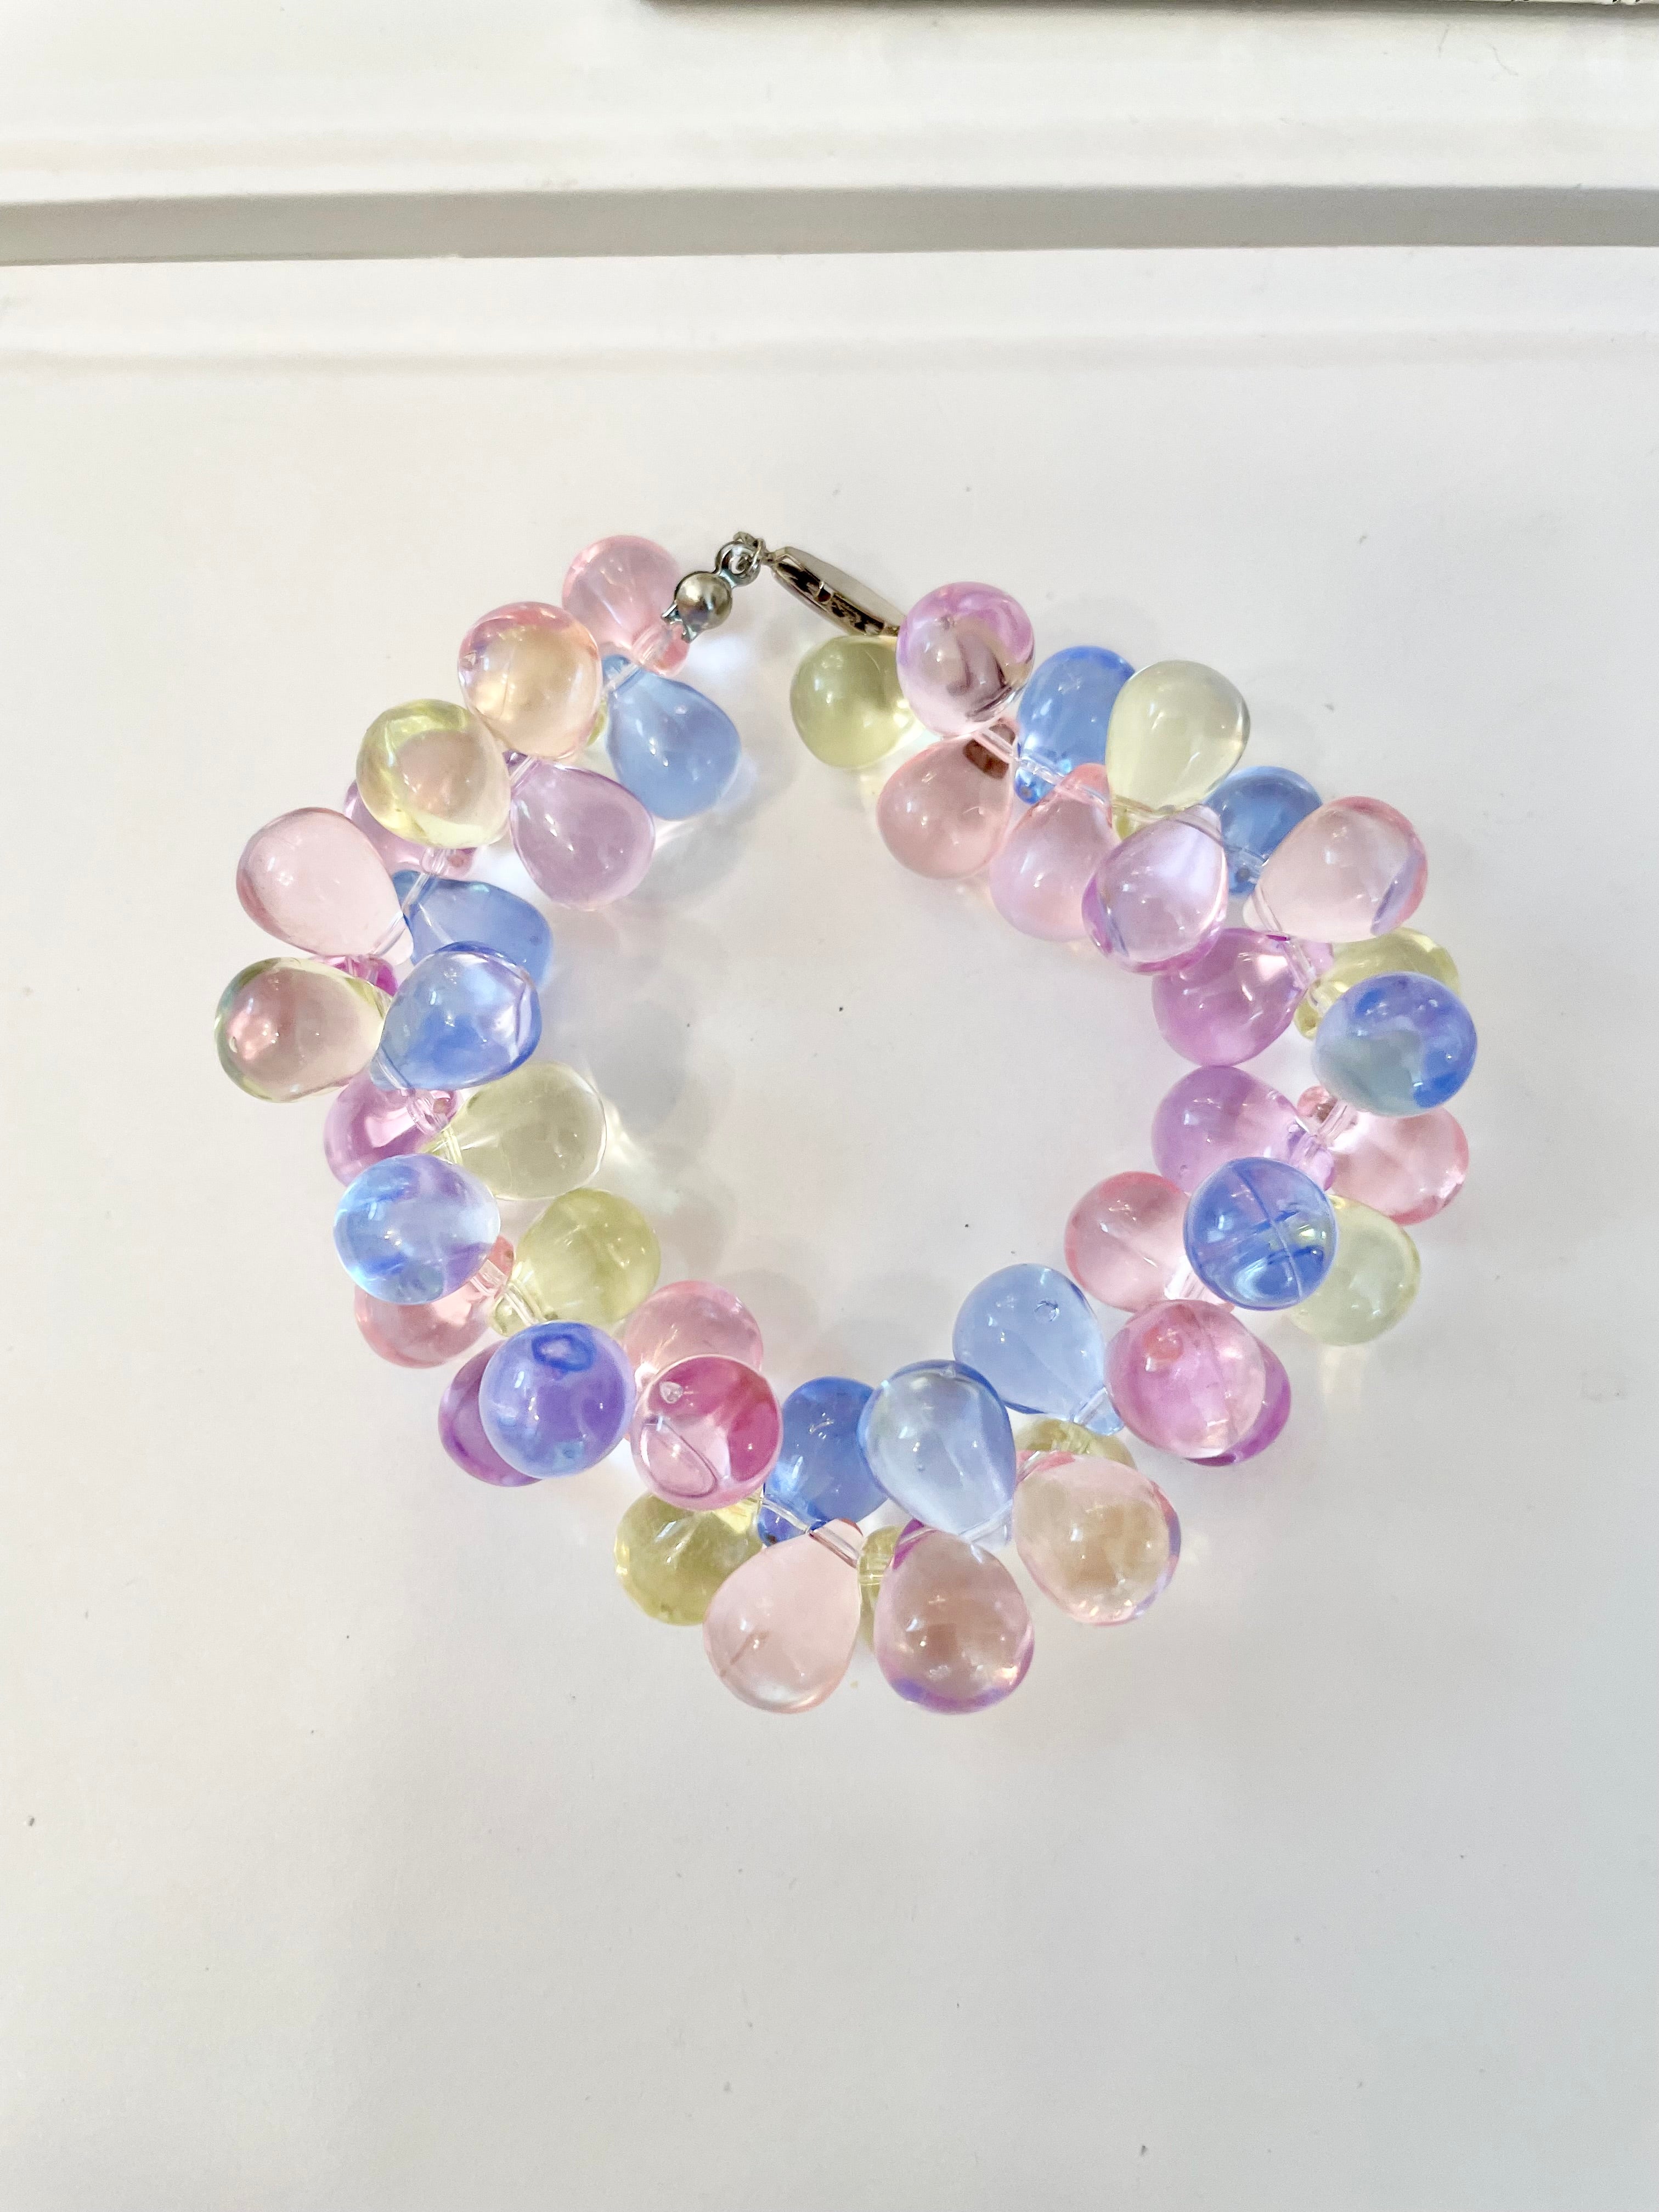 The happy hostess and her love of color.. This lucite bracelet is truly divine.